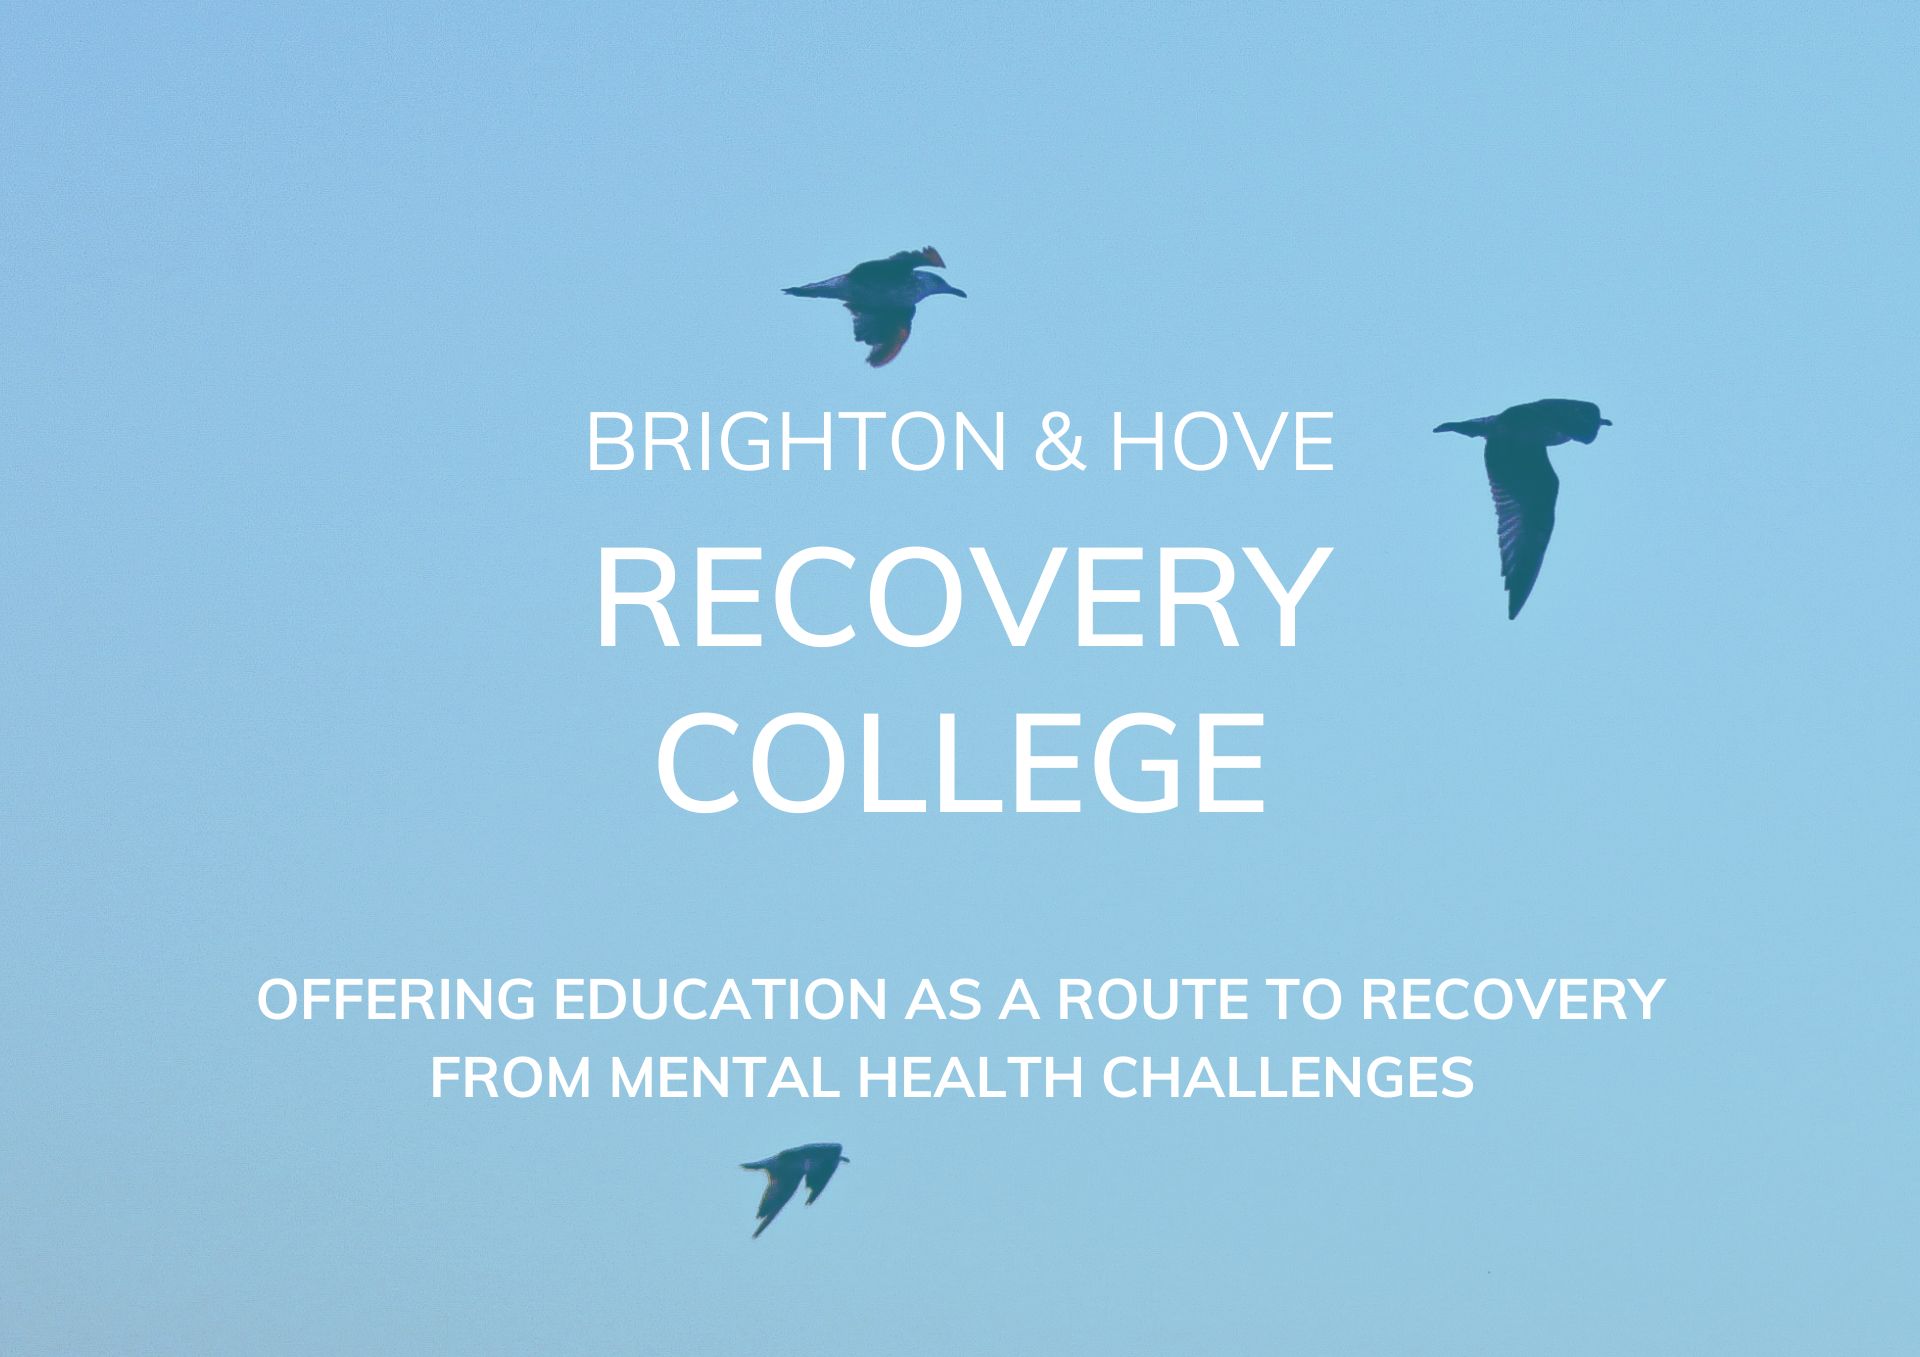 Photo of sky and three silhouted birds - text: Brighton and hove Recovery College, OFFERING EDUCATION AS A ROUTE TO RECOVERY FROM MENTAL HEALTH CHALLENGES